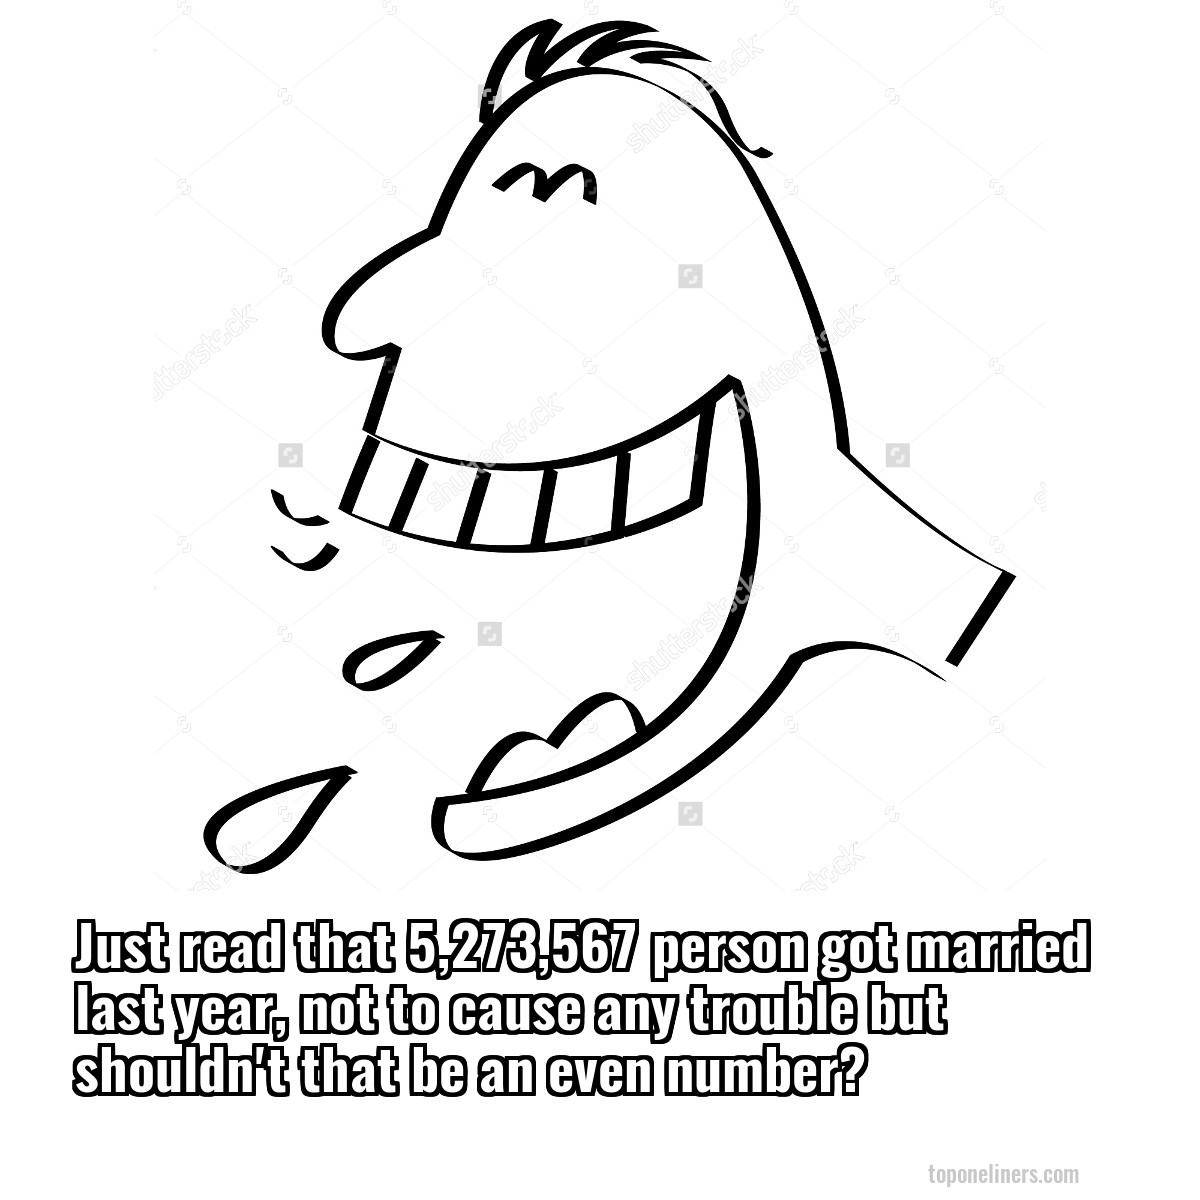 Just read that 5,273,567 person got married last year, not to cause any trouble but shouldn't that be an even number?